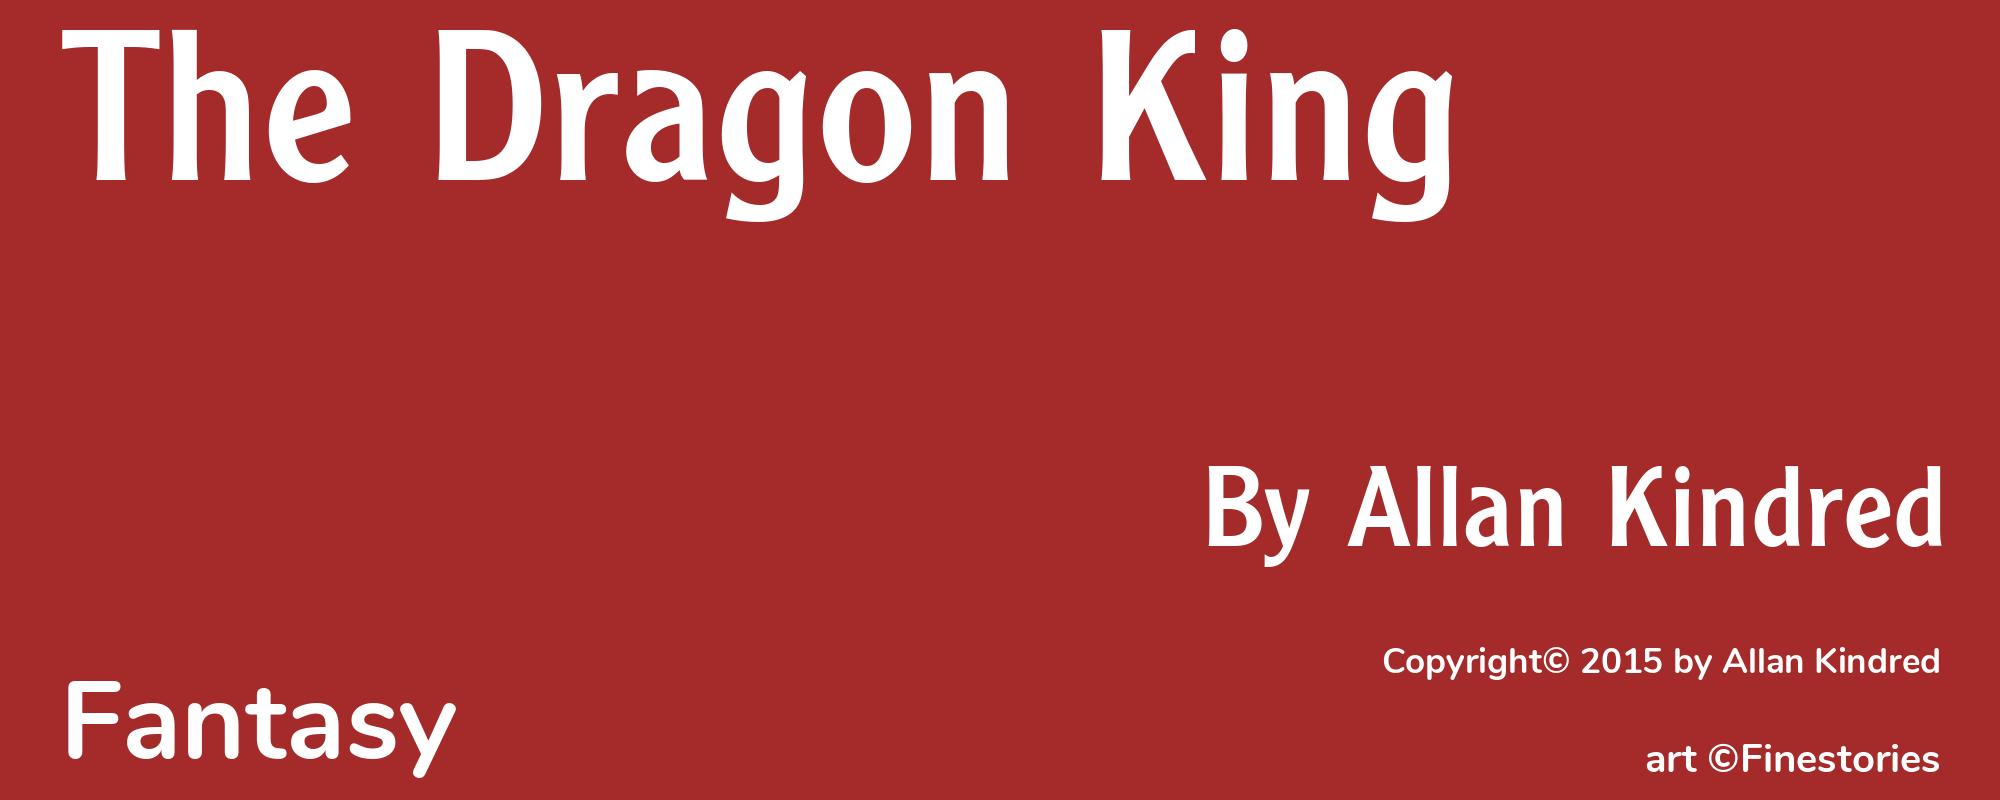 The Dragon King - Cover